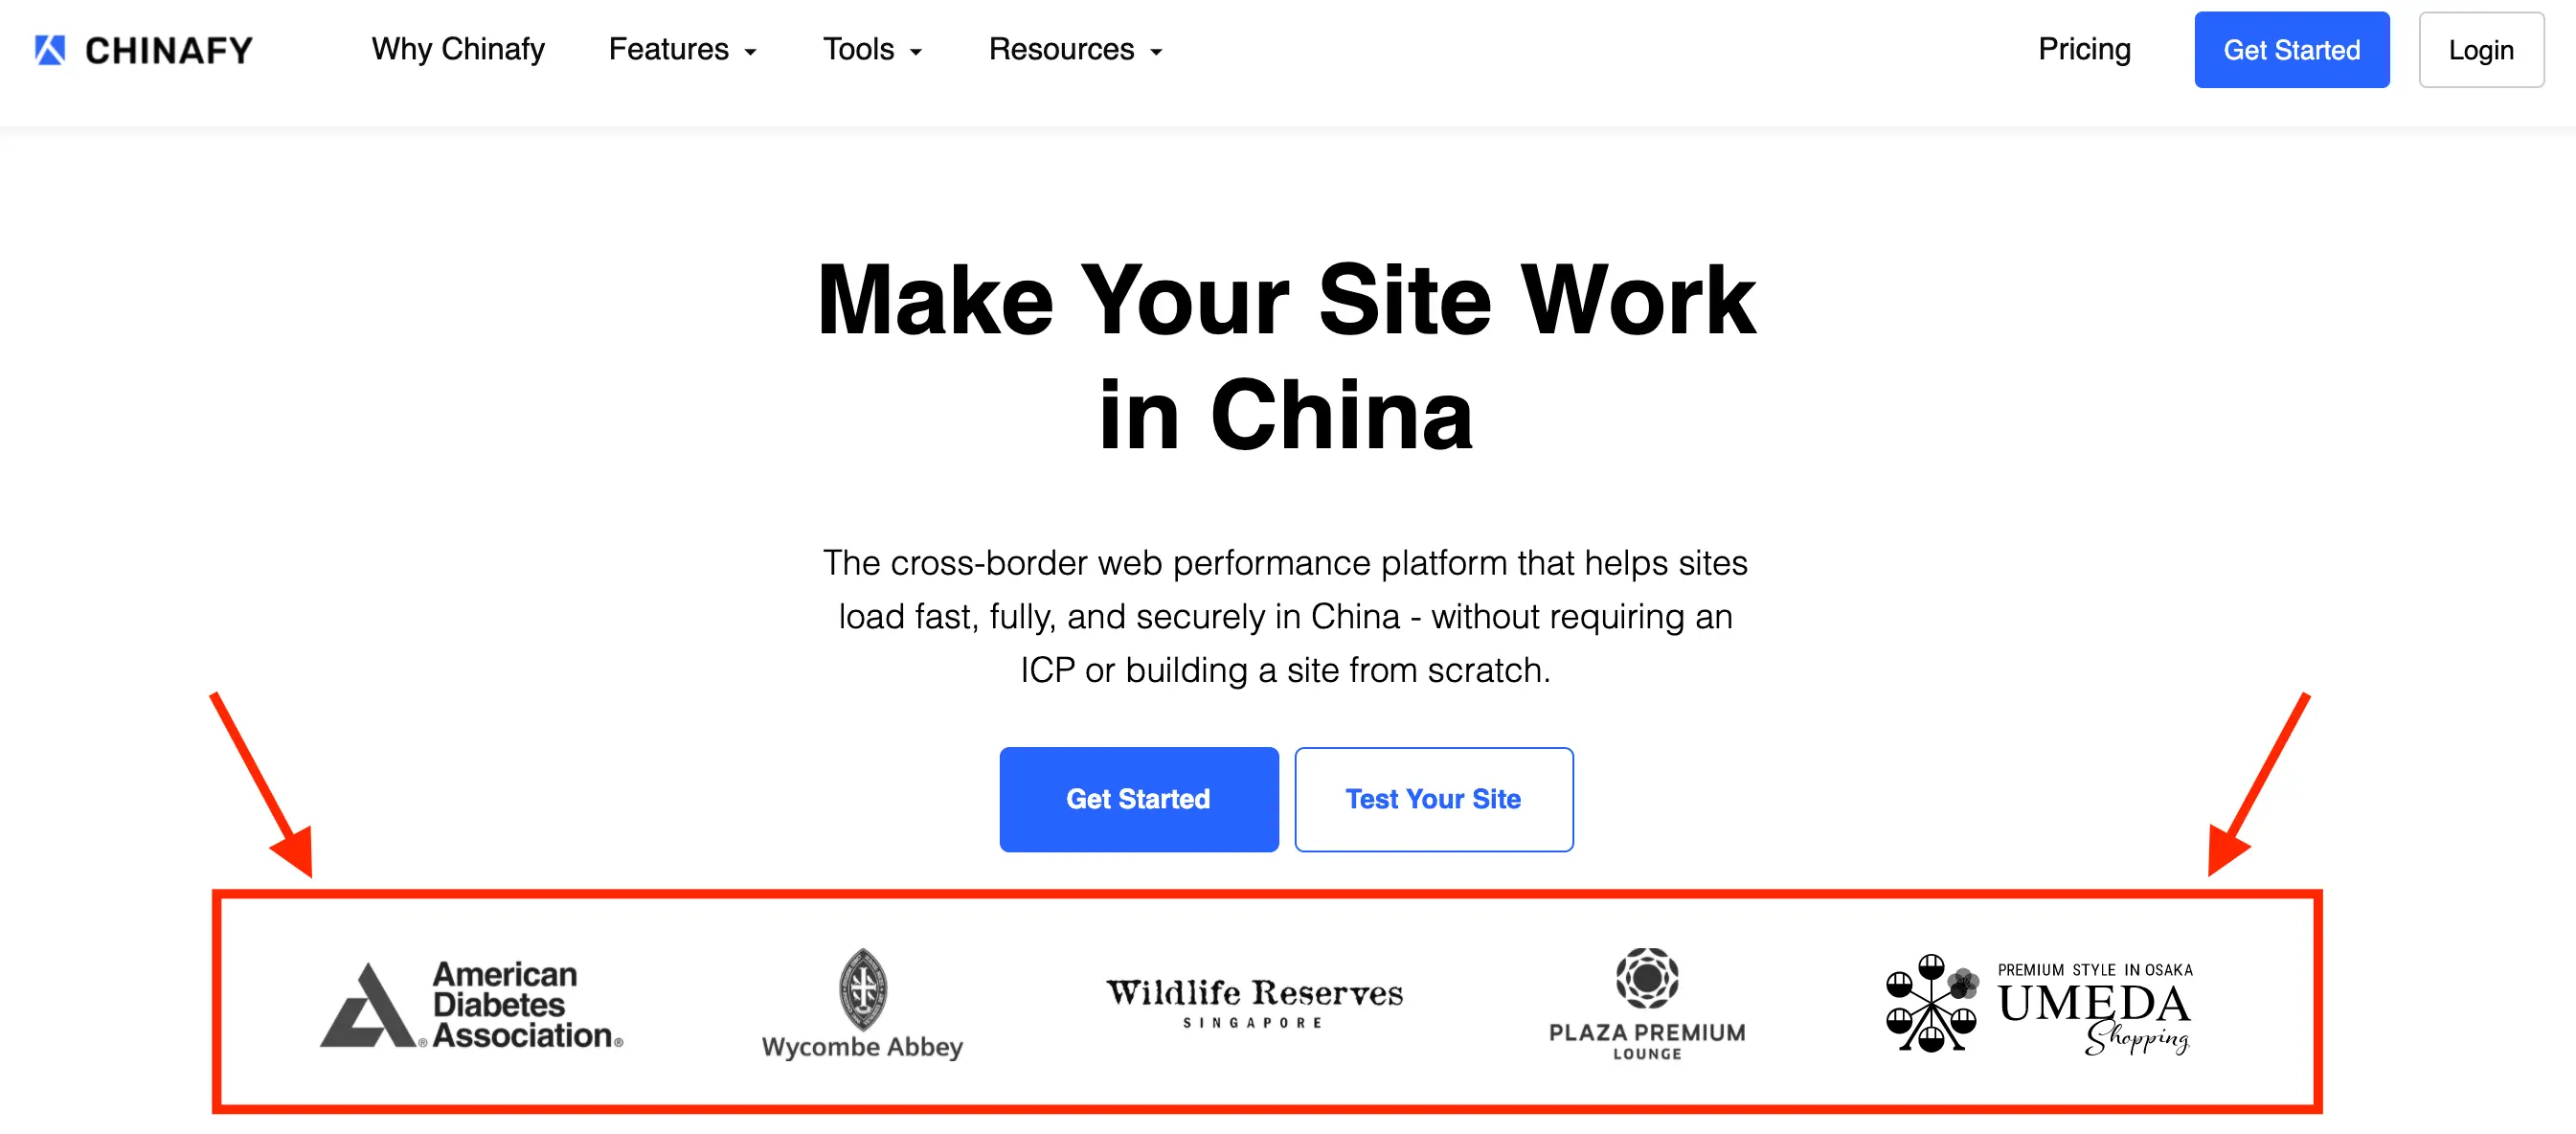 Businesses using Chinafy to power their websites in mainland China